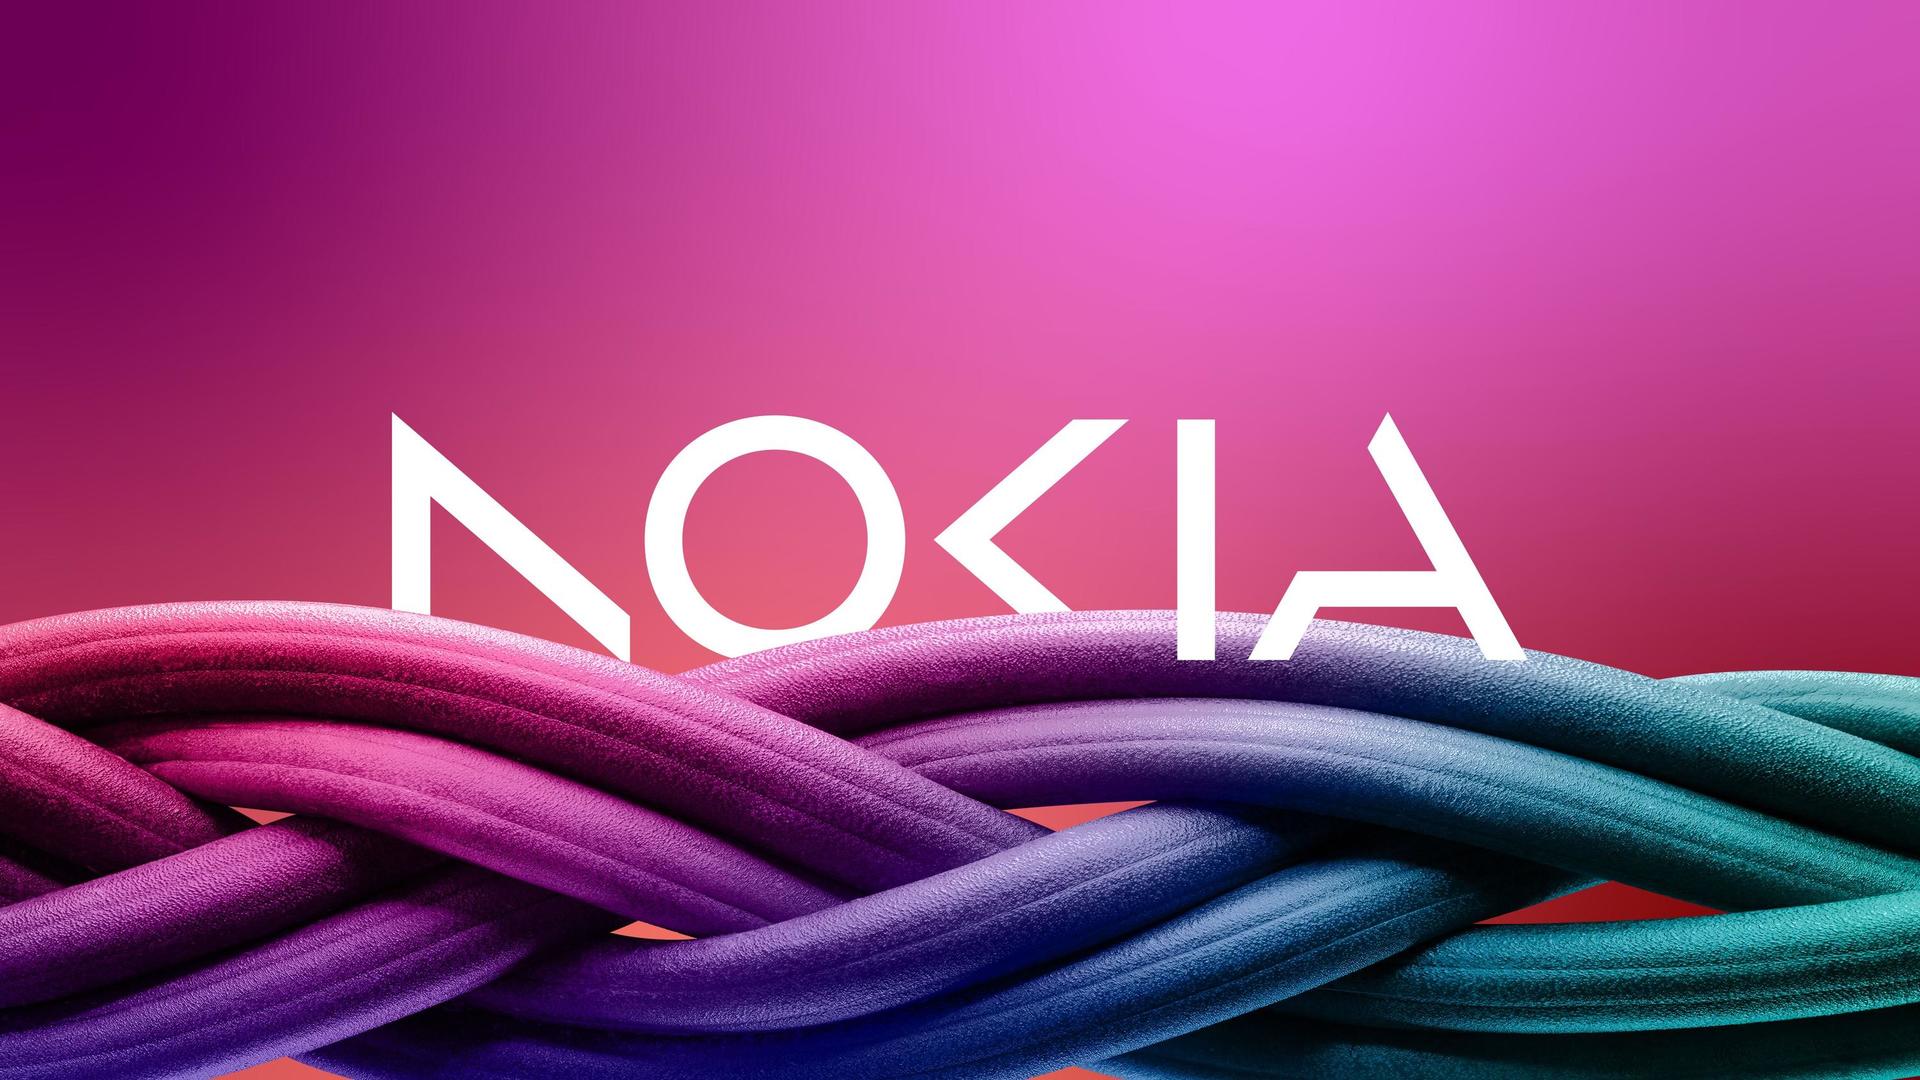 Nokia upgrades DOCOMO's IP core, enables network slicing for 5G services